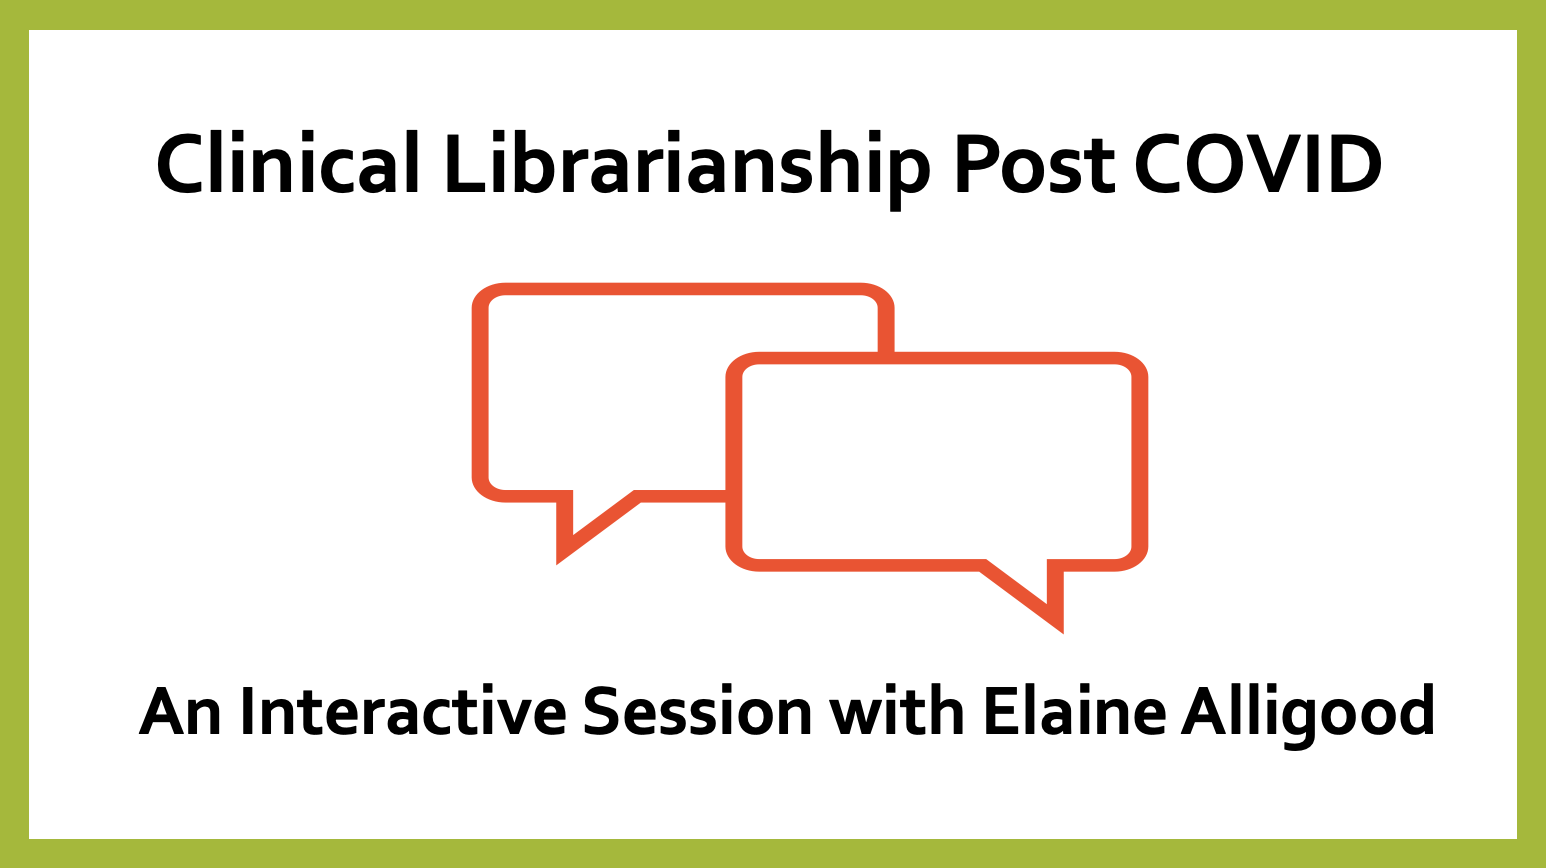 Clinical Librarianship Post COVID